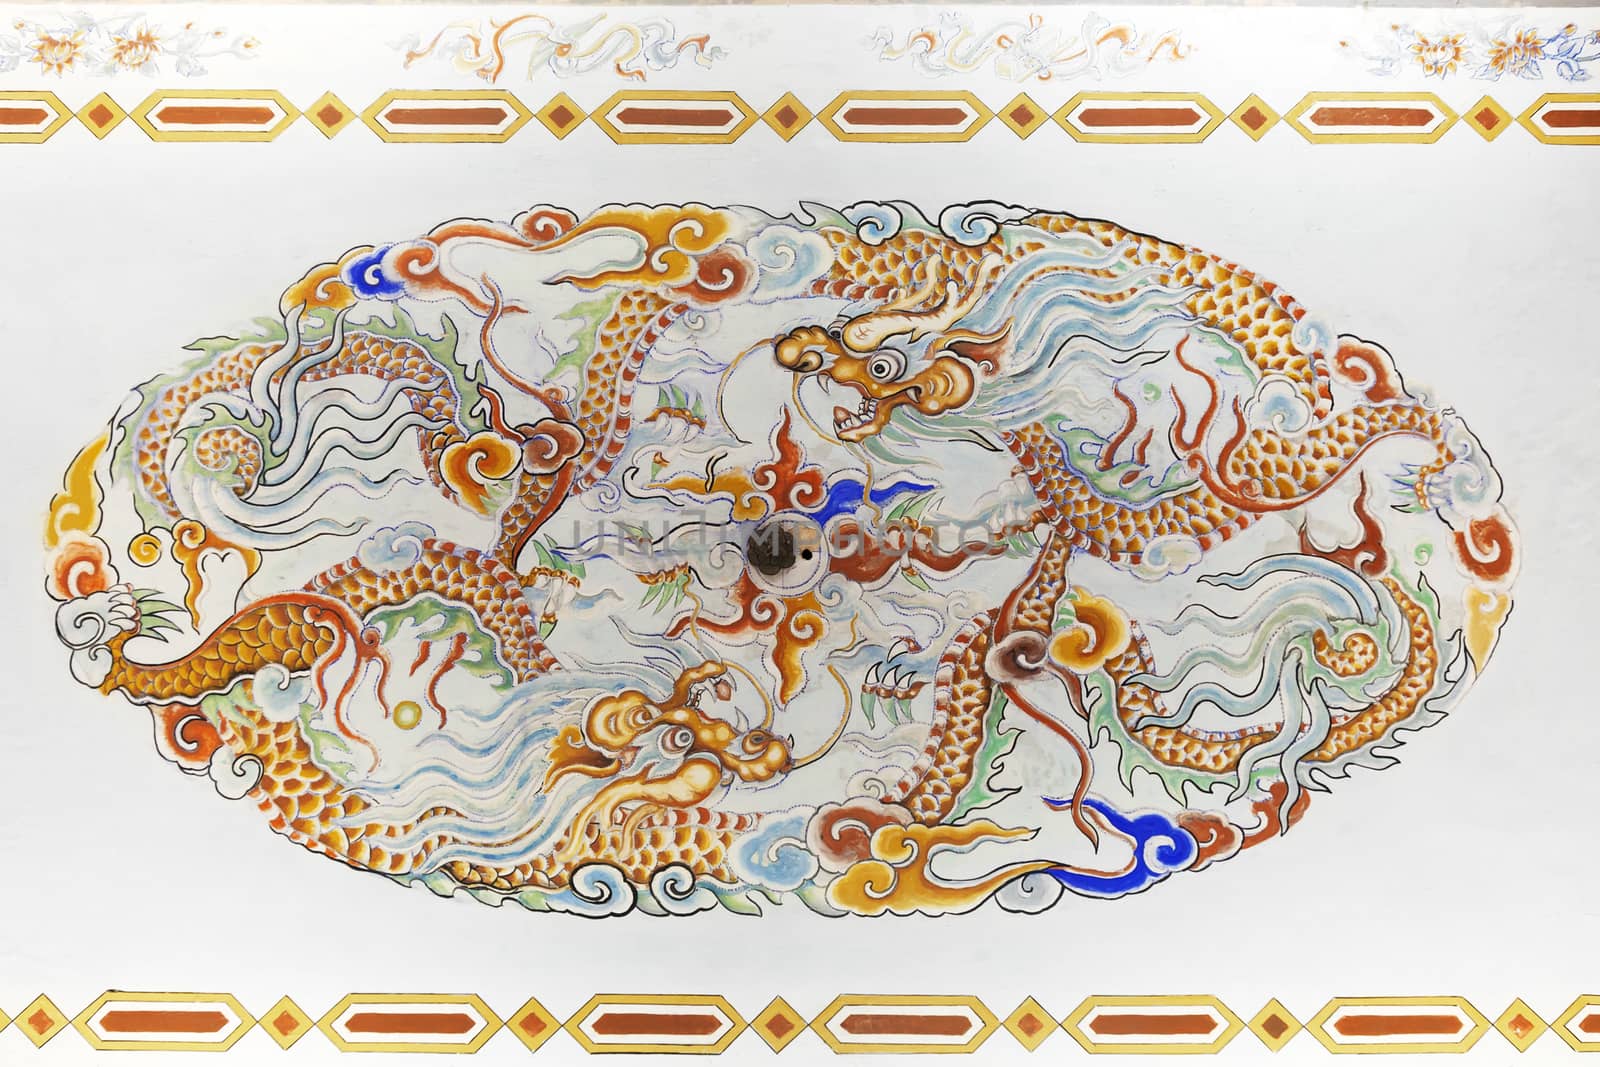 Dragon decoration in Imperial City, Hue, Vietnam by Goodday